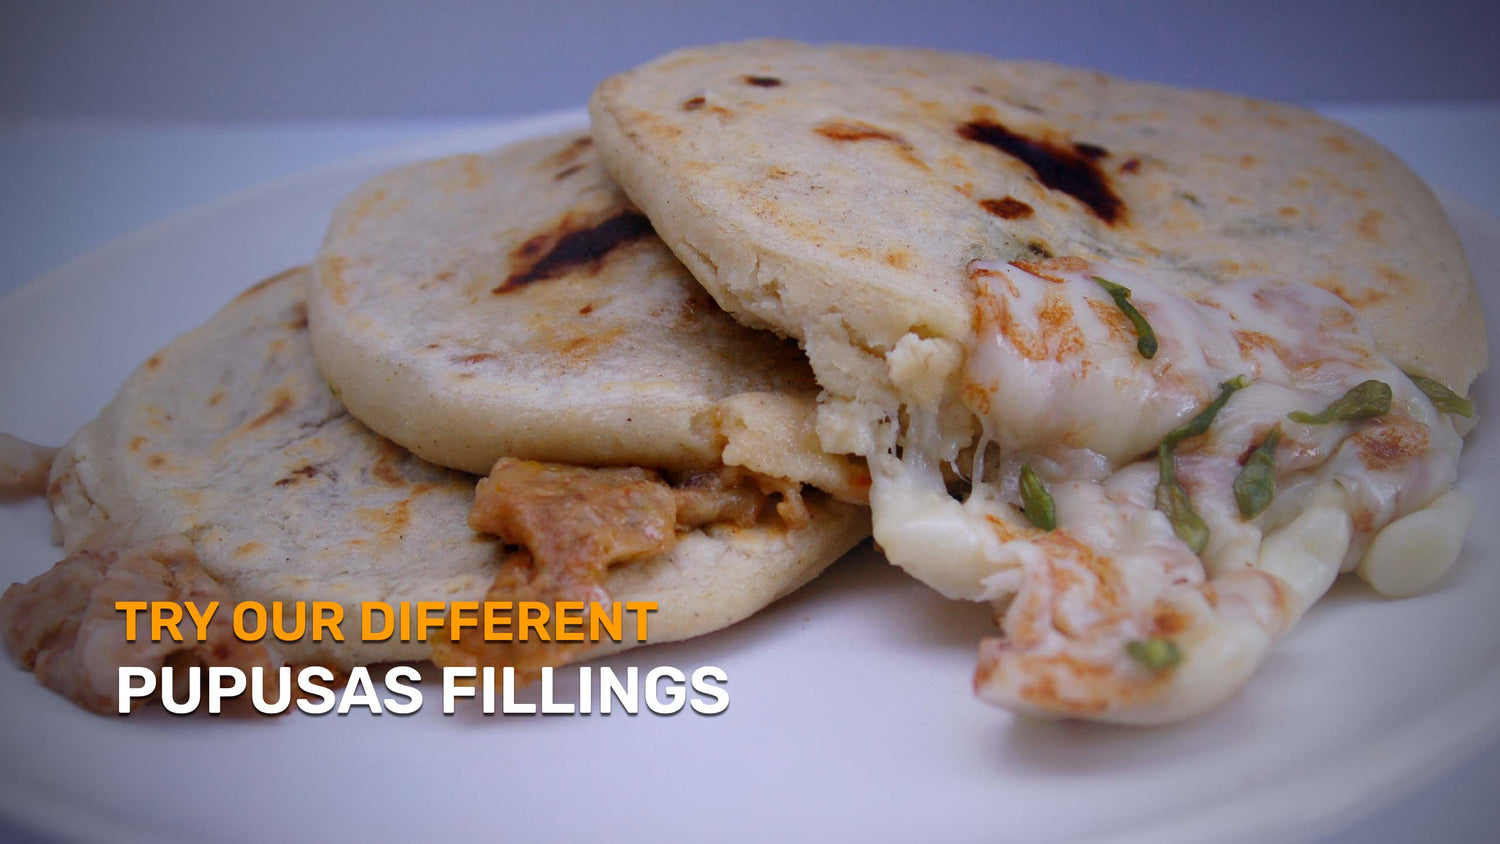 Xinca Foods. Try our different pupusa fillings, Cheese and Loroco or Bean and Cheese.